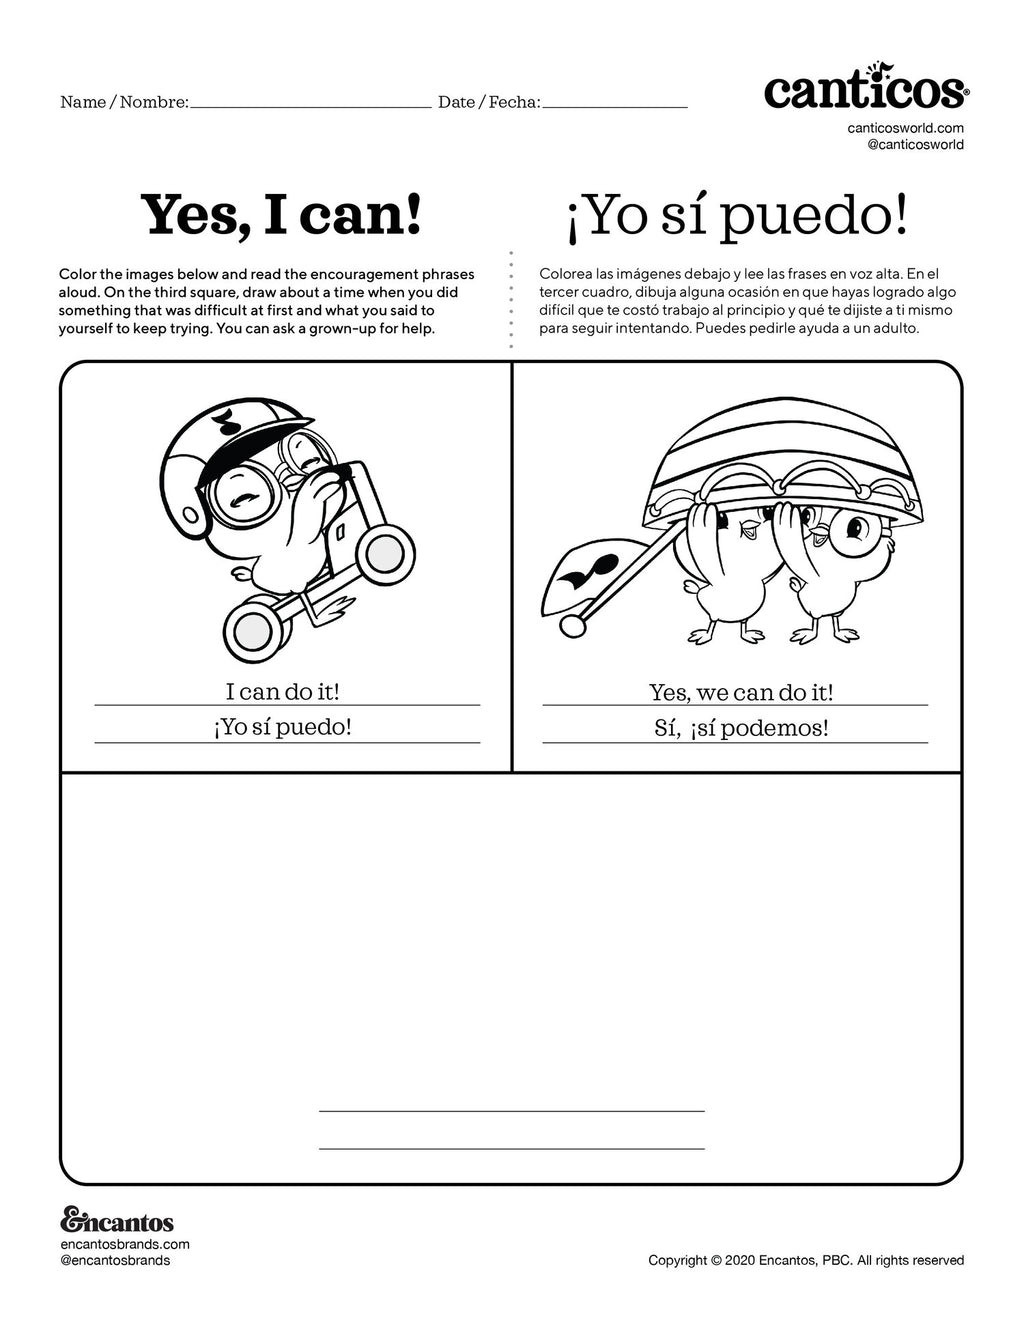 Yes I can! - Free Activity Sheet